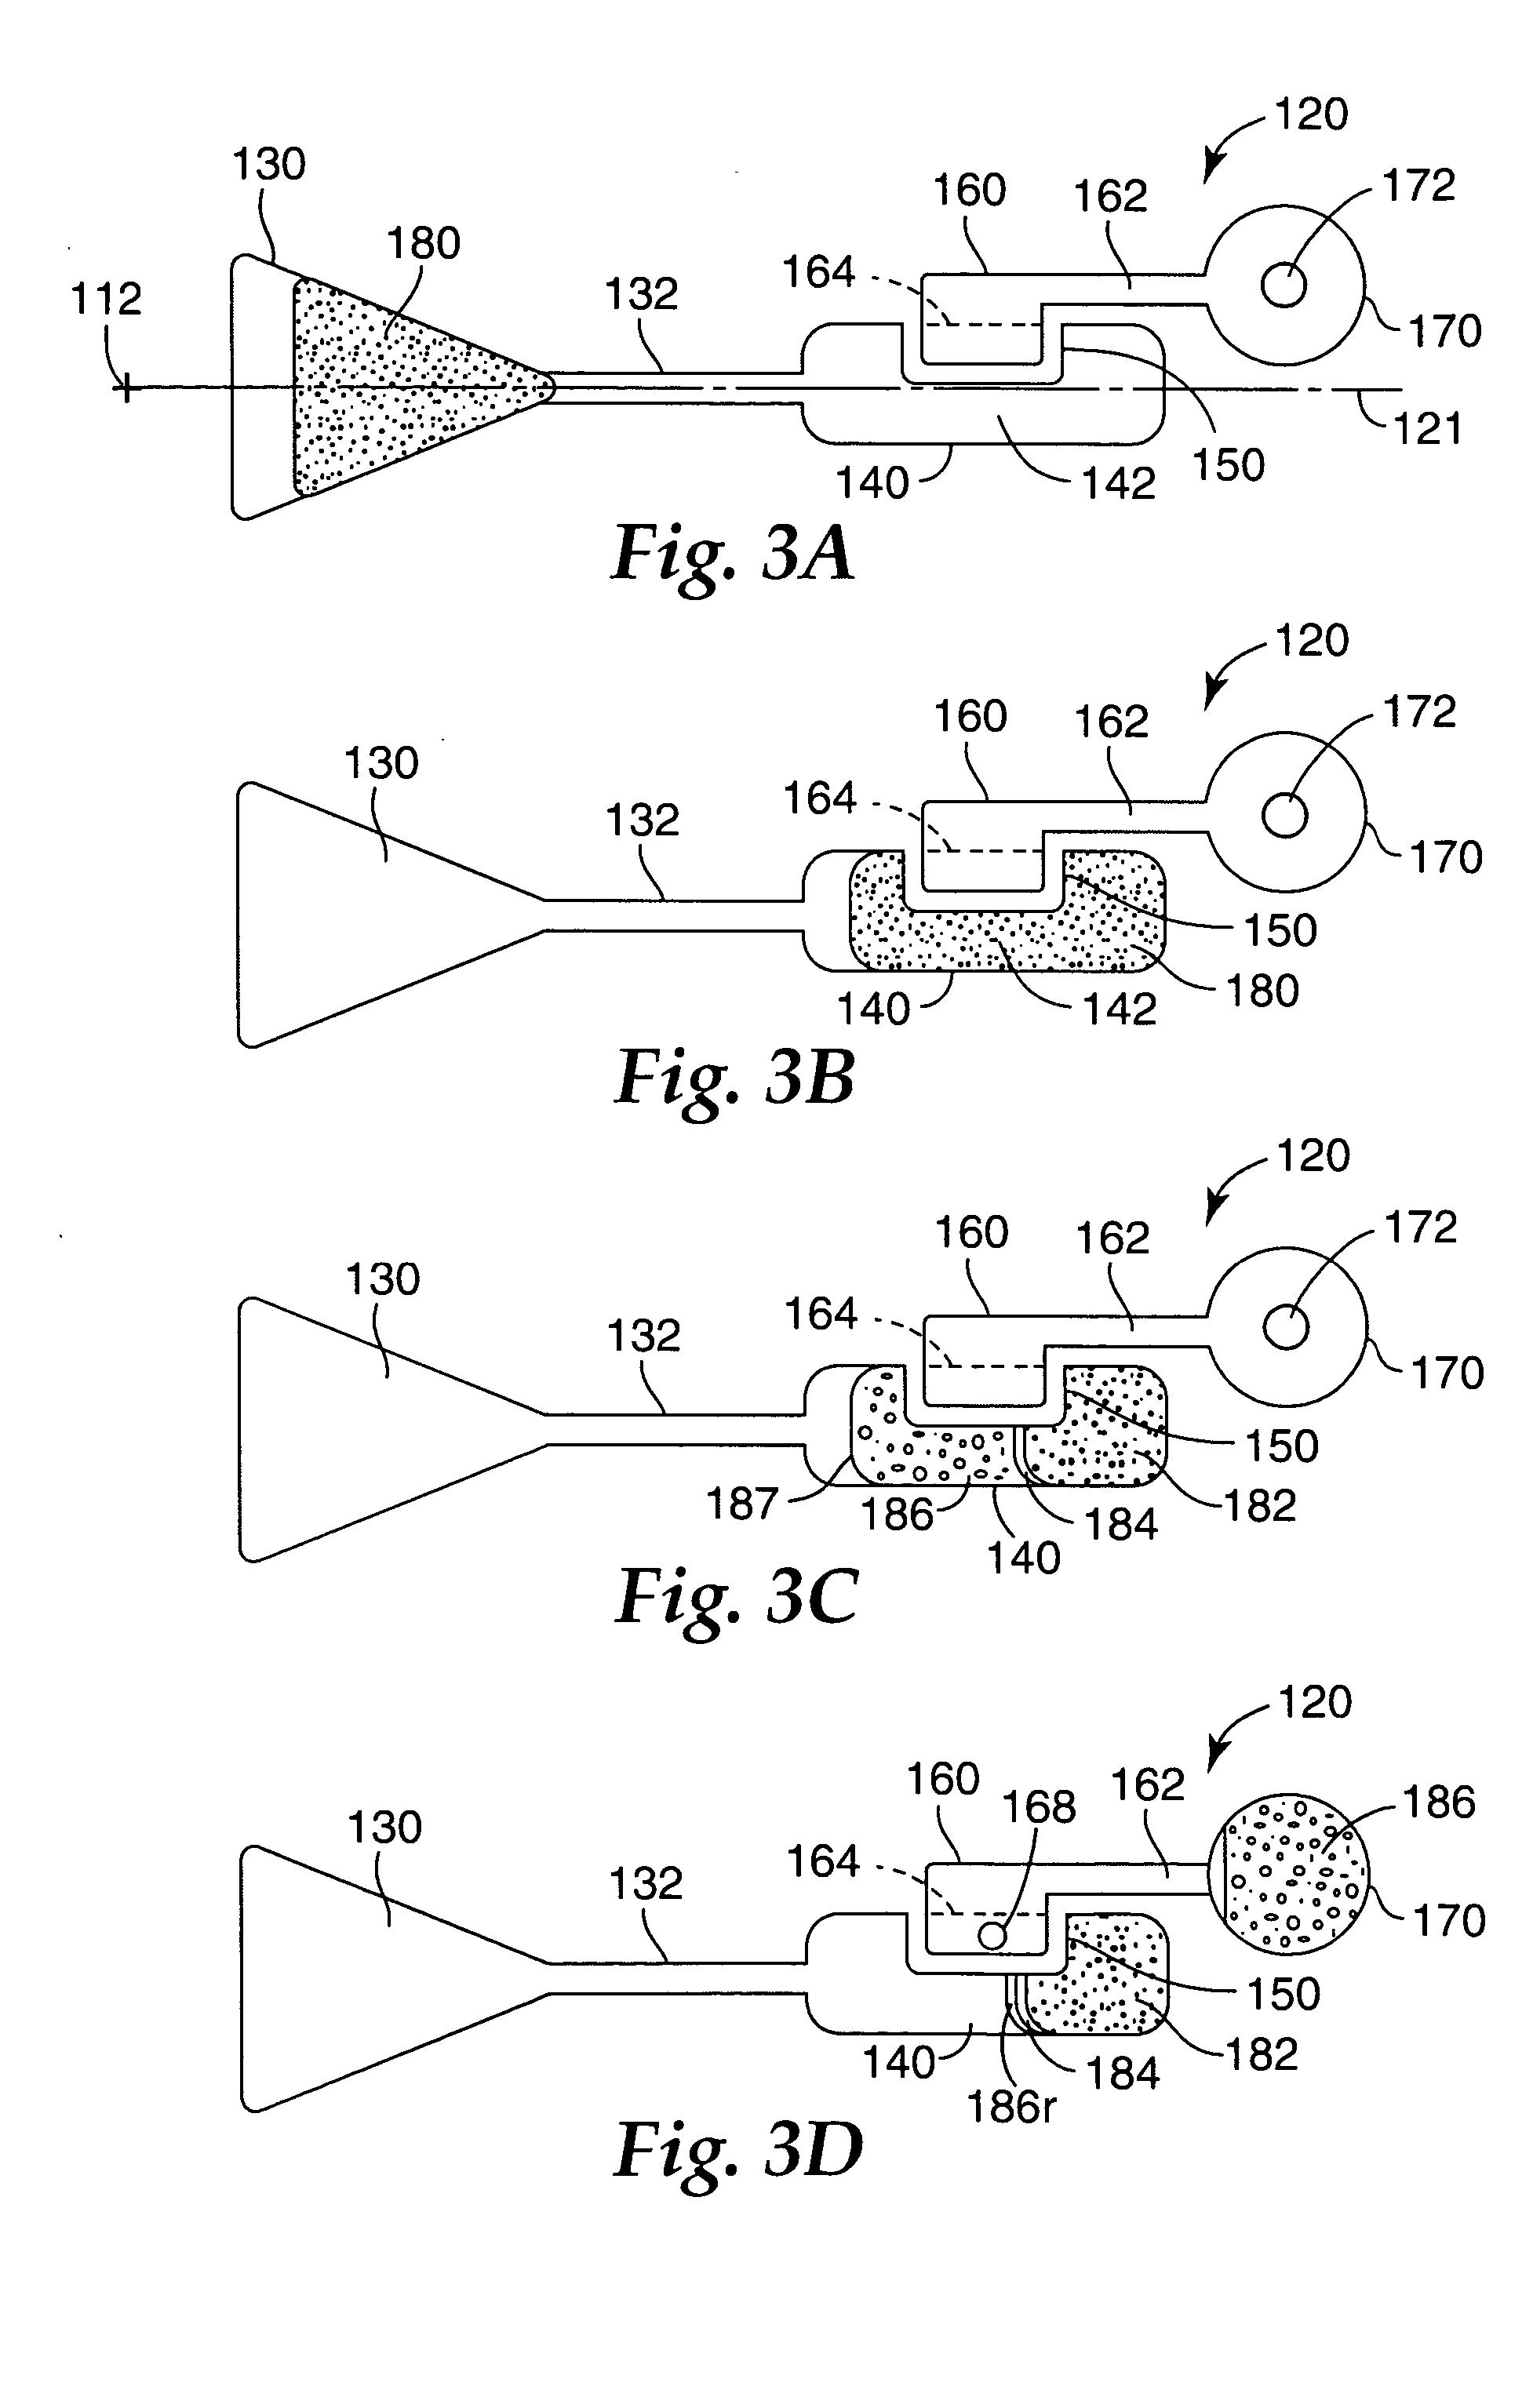 Variable valve apparatus and methods